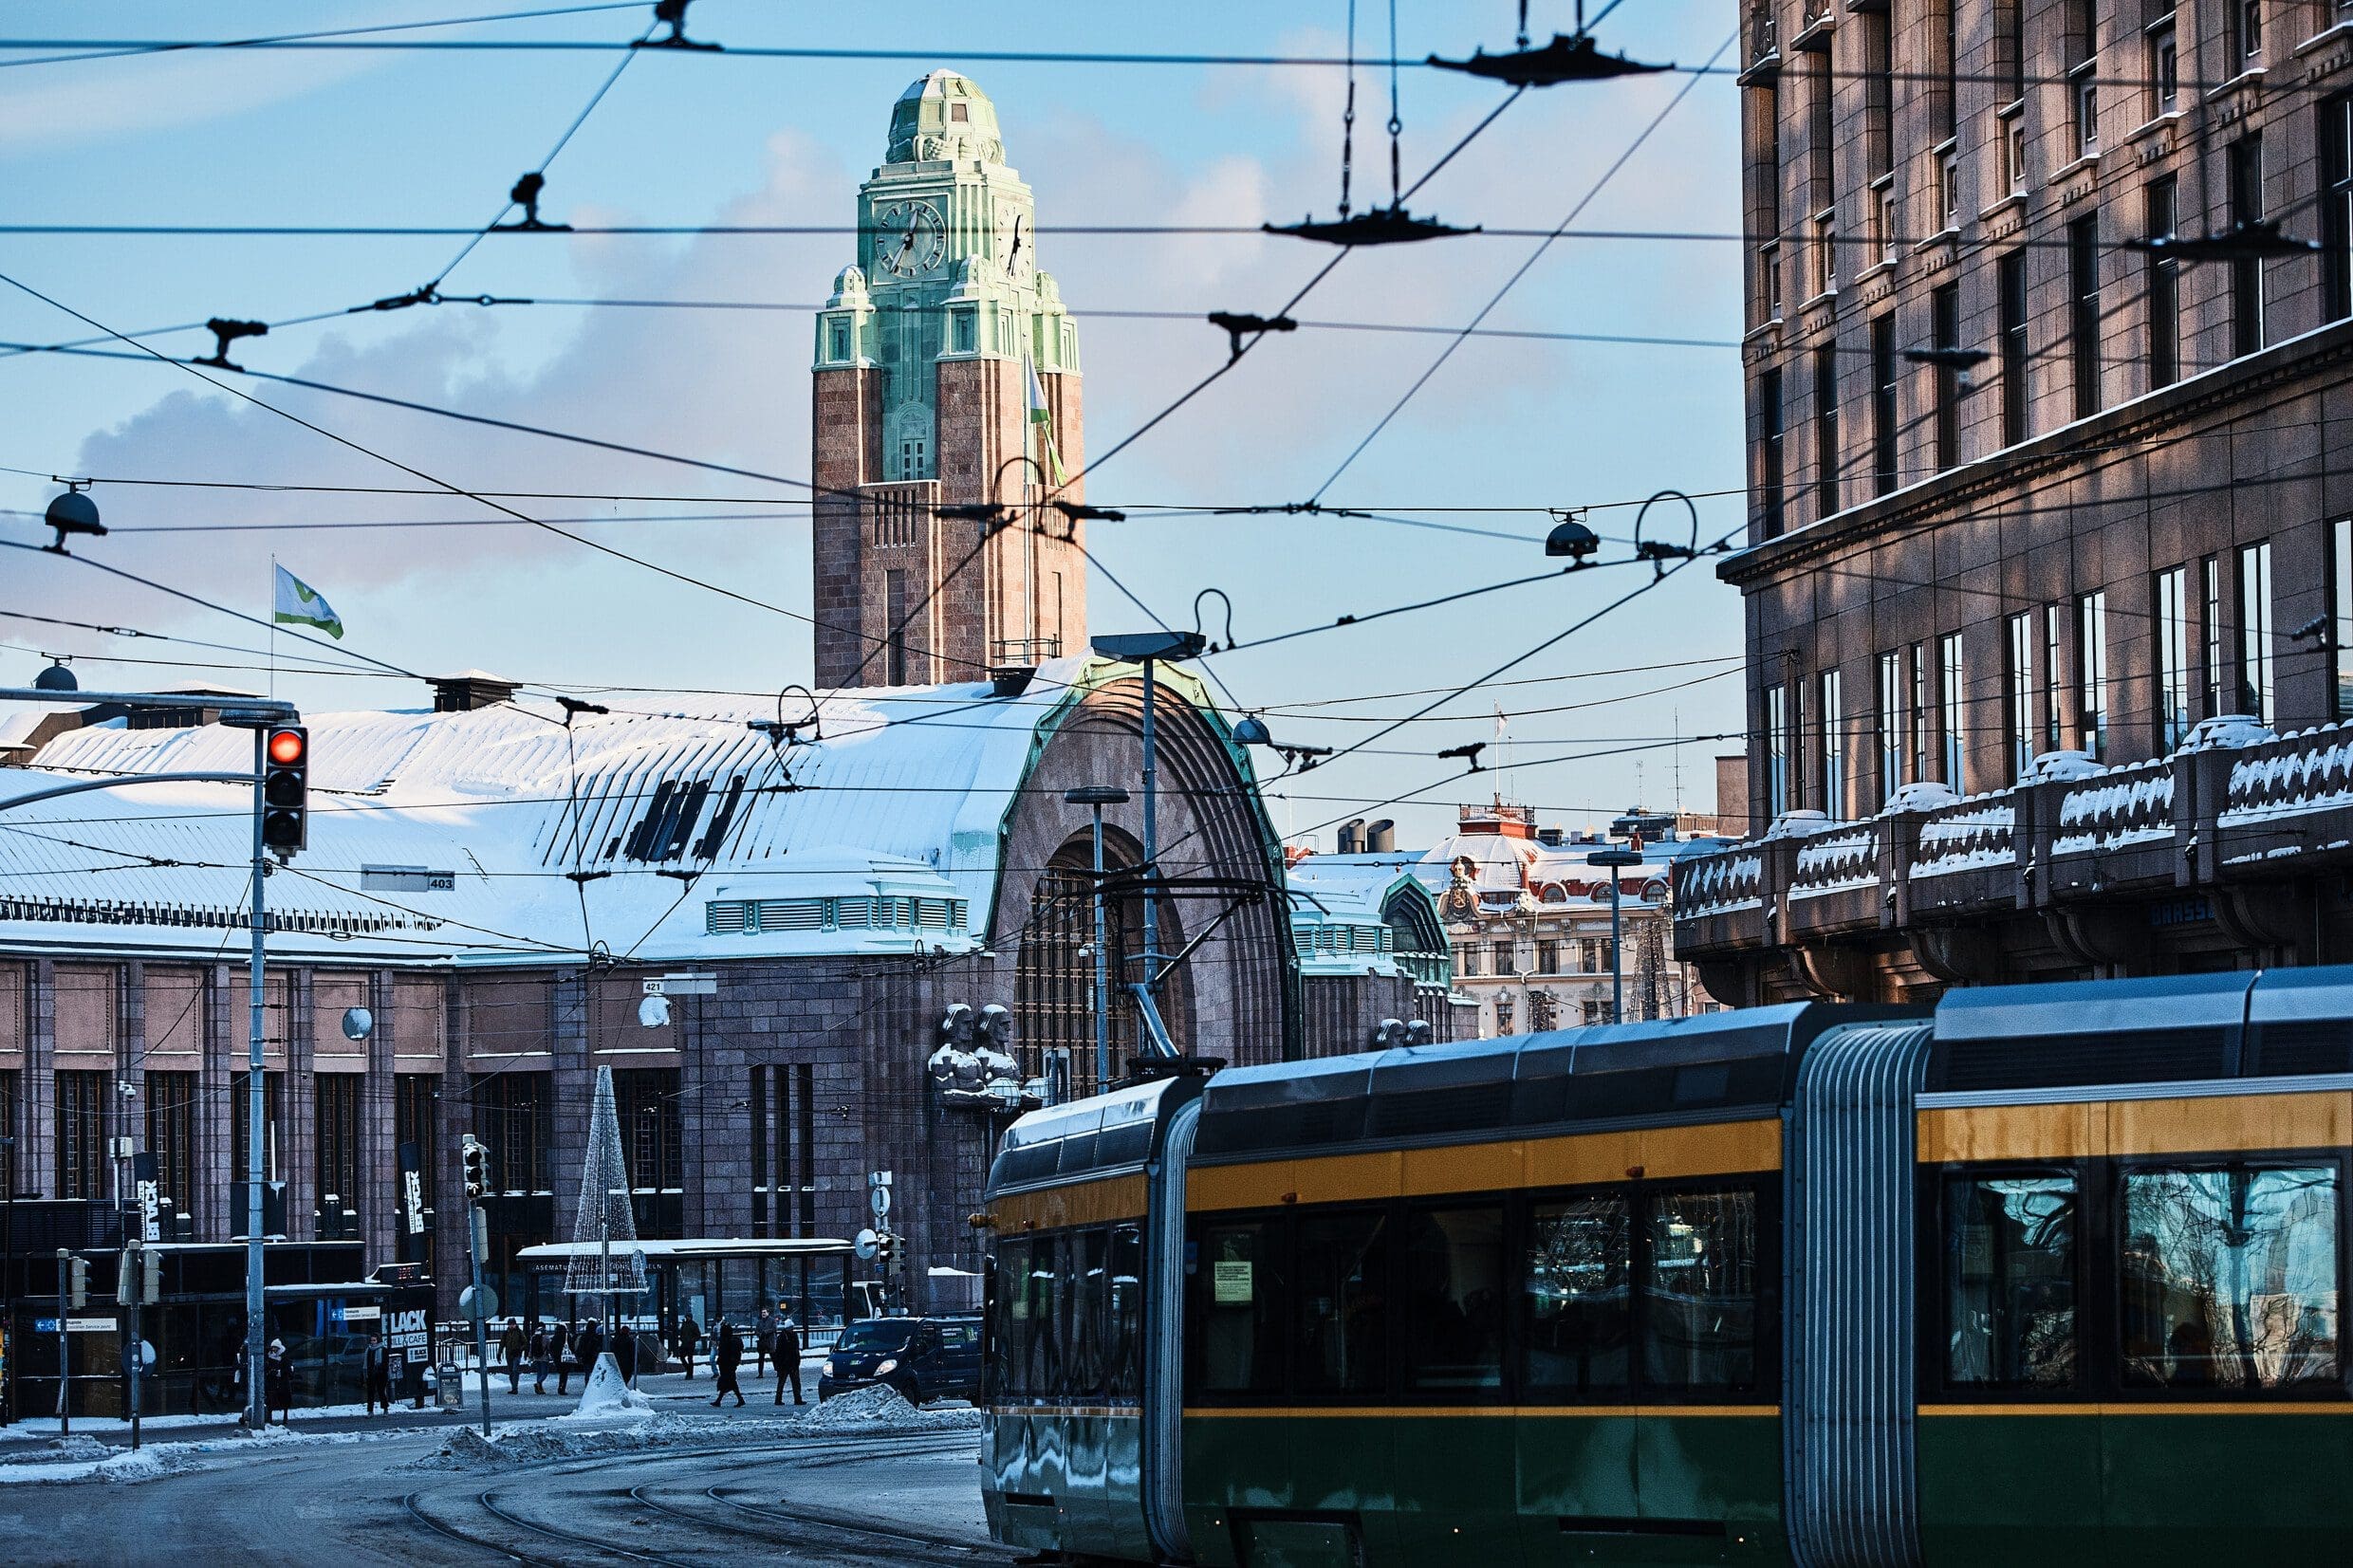 Tram turning a corner in front of Helsinki Central Station in the winter